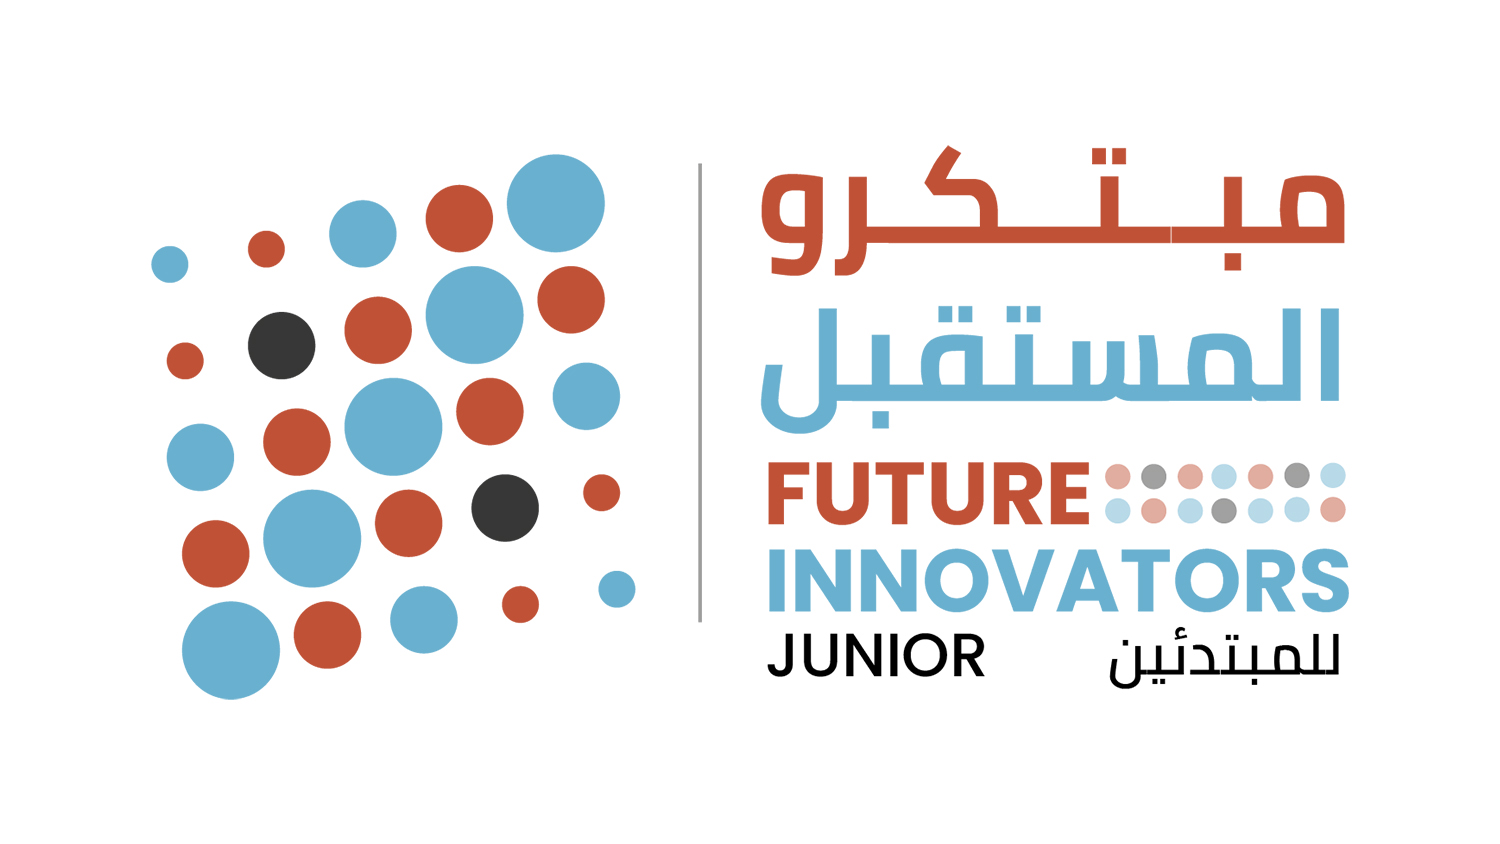 FUTURE INNOVATORS-JUNIOR to be held on 14th March 2023